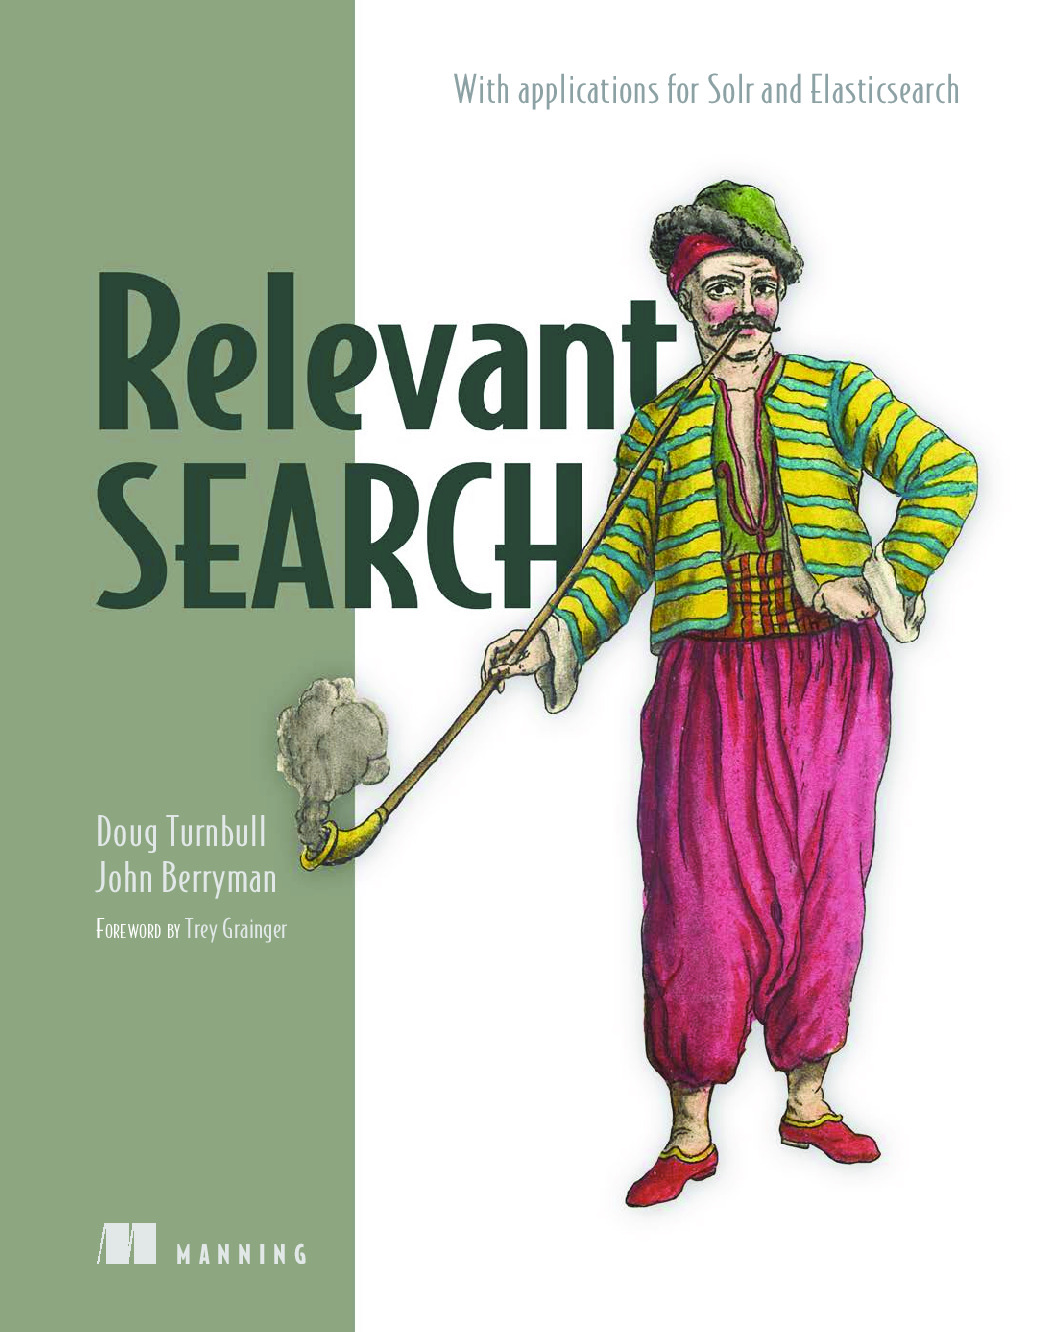 Relevant Search – With applications for Solr and Elasticsearch